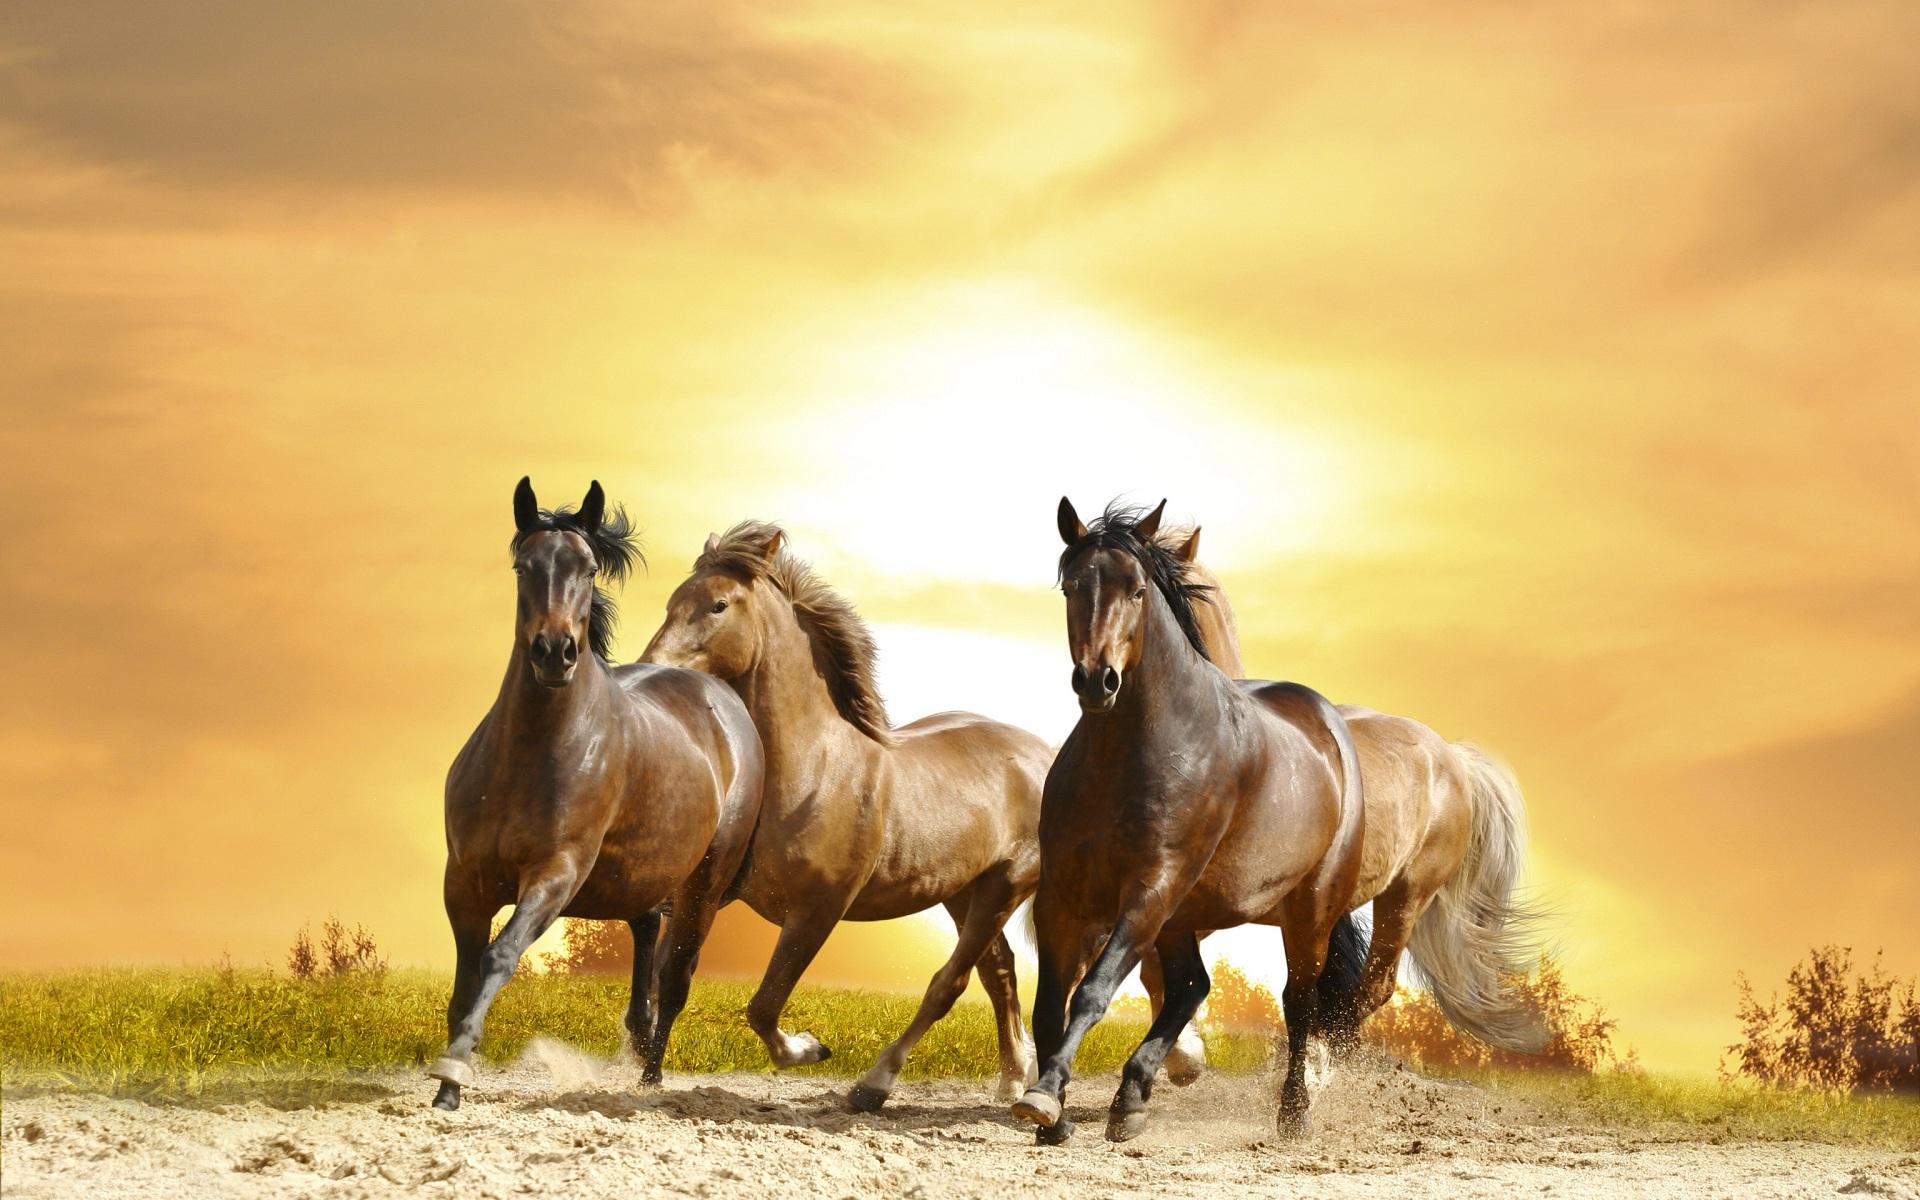 Free download WallFocuscom Galloping Horse HD Wallpaper Search Engine